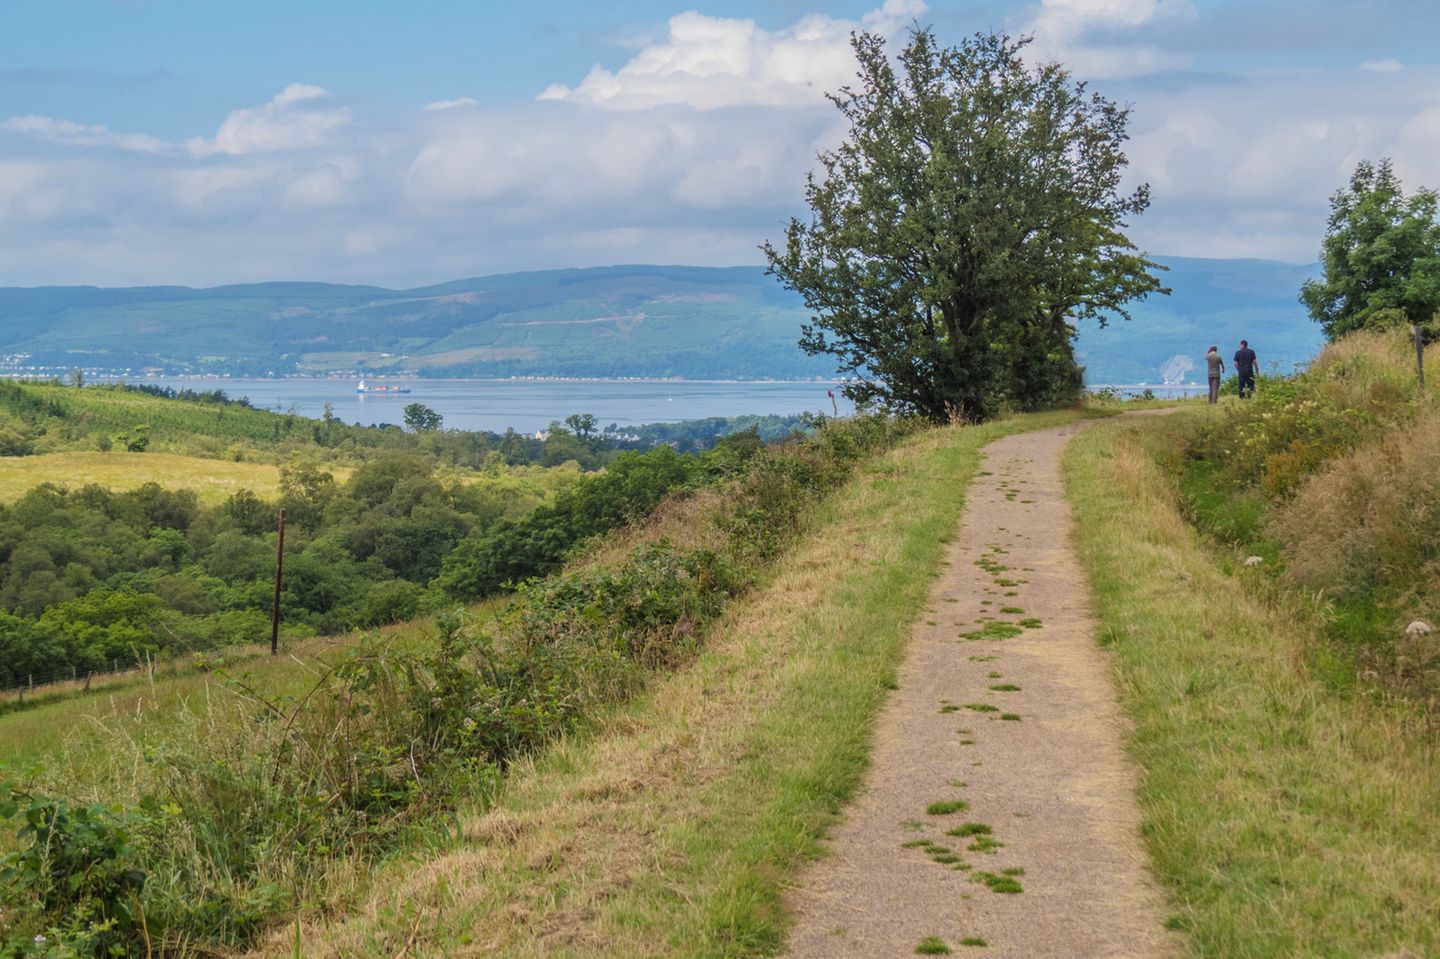 Views along the Greenock Cut in the Clyde Muirshiel Regional Park, looking out towards the Firth of the Clyde far below.